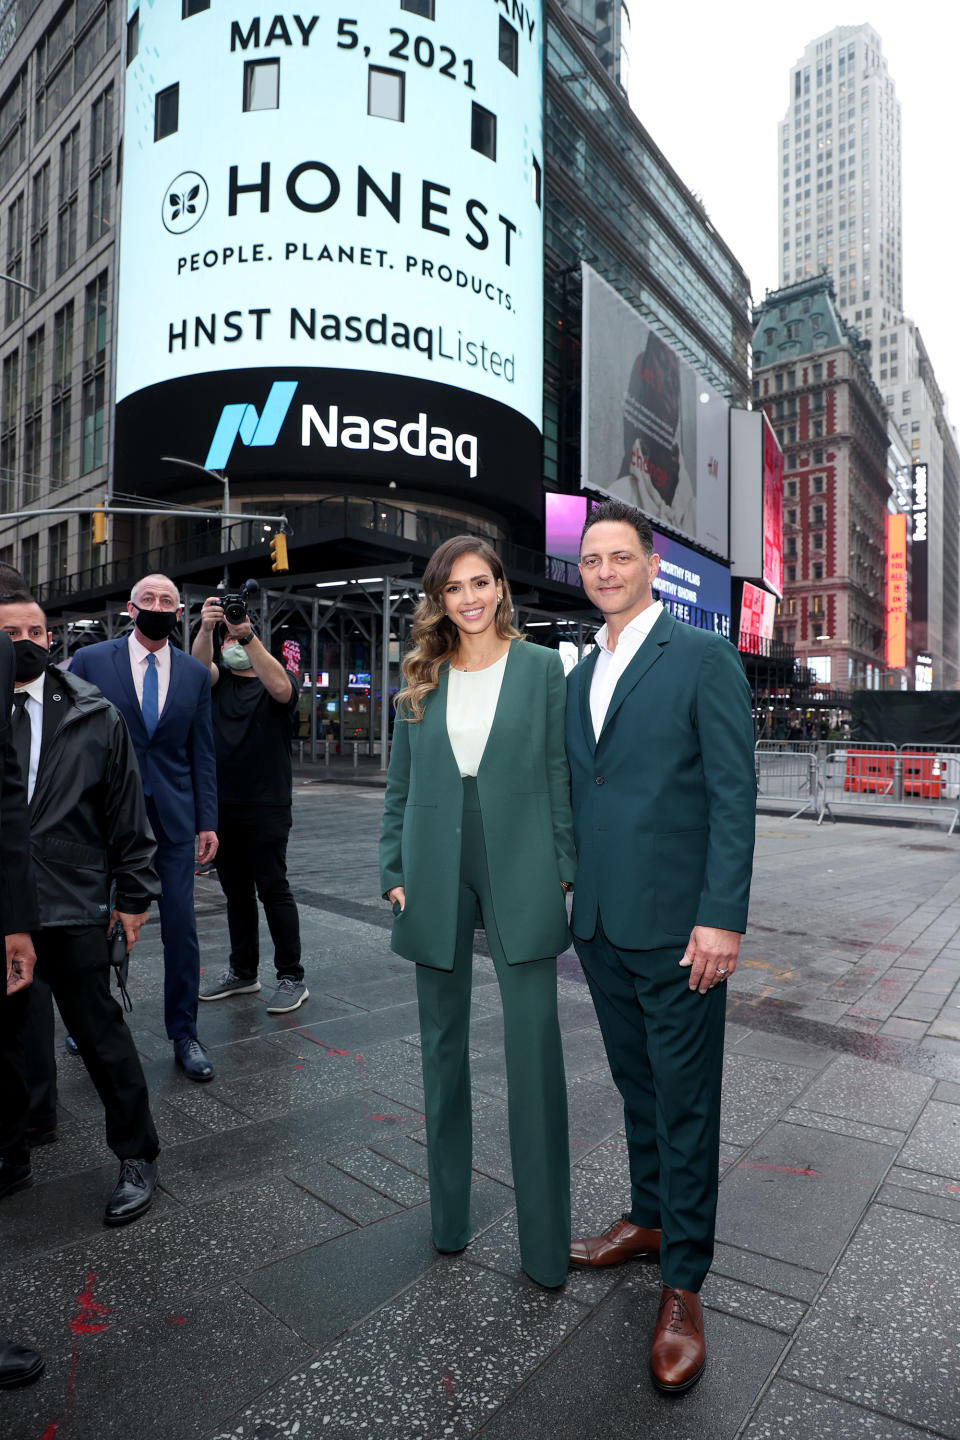 NEW YORK, NEW YORK - MAY 05: The Honest Company founder and chief creative officer Jessica Alba and The Honest Company CEO Nick Vlahos pose outside of Nasdaq as The Honest Company rings the Nasdaq Stock Market opening bell to mark the company's IPO at NASDAQ MarketSite on May 05, 2021 in New York City. (Photo by Dimitrios Kambouris/Getty Images for The Honest Company )